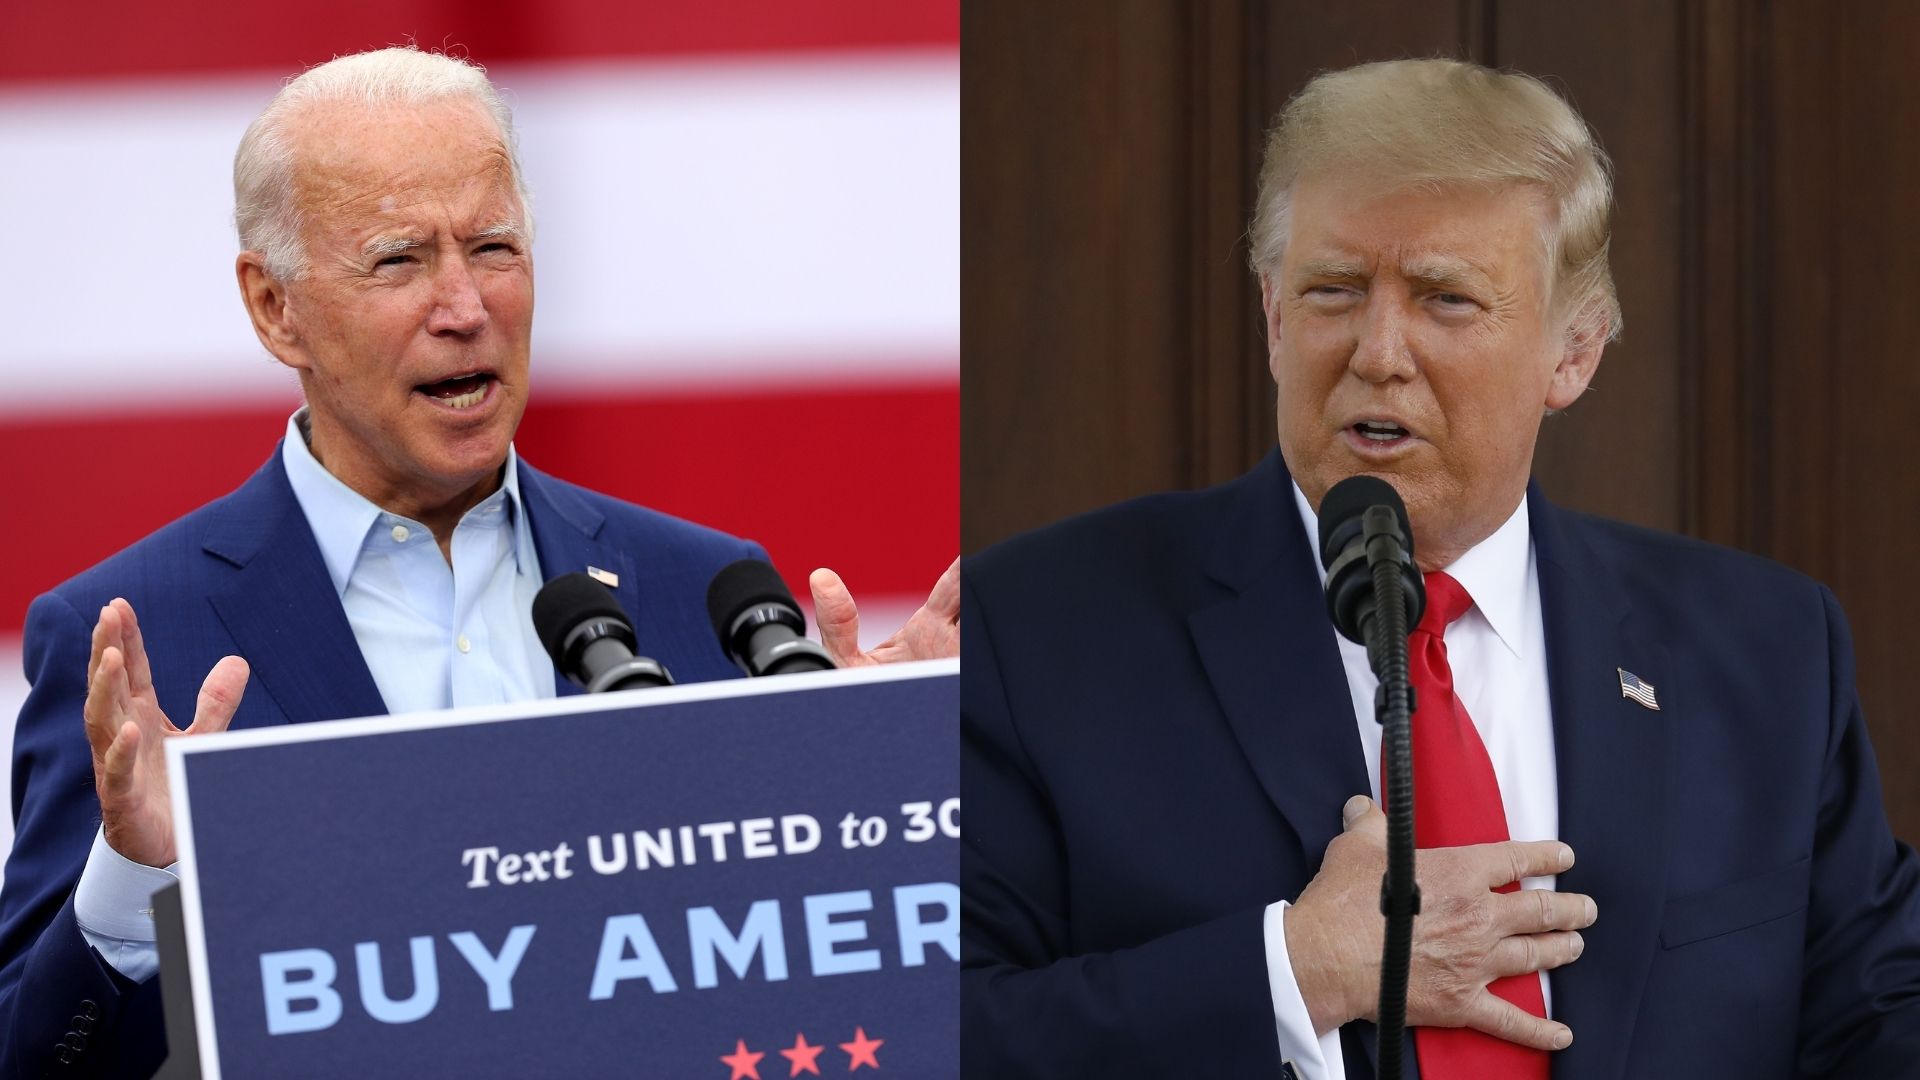 Russia Looks Like It’s Targeting the Biden Campaign — and Trump Seems Fine With It